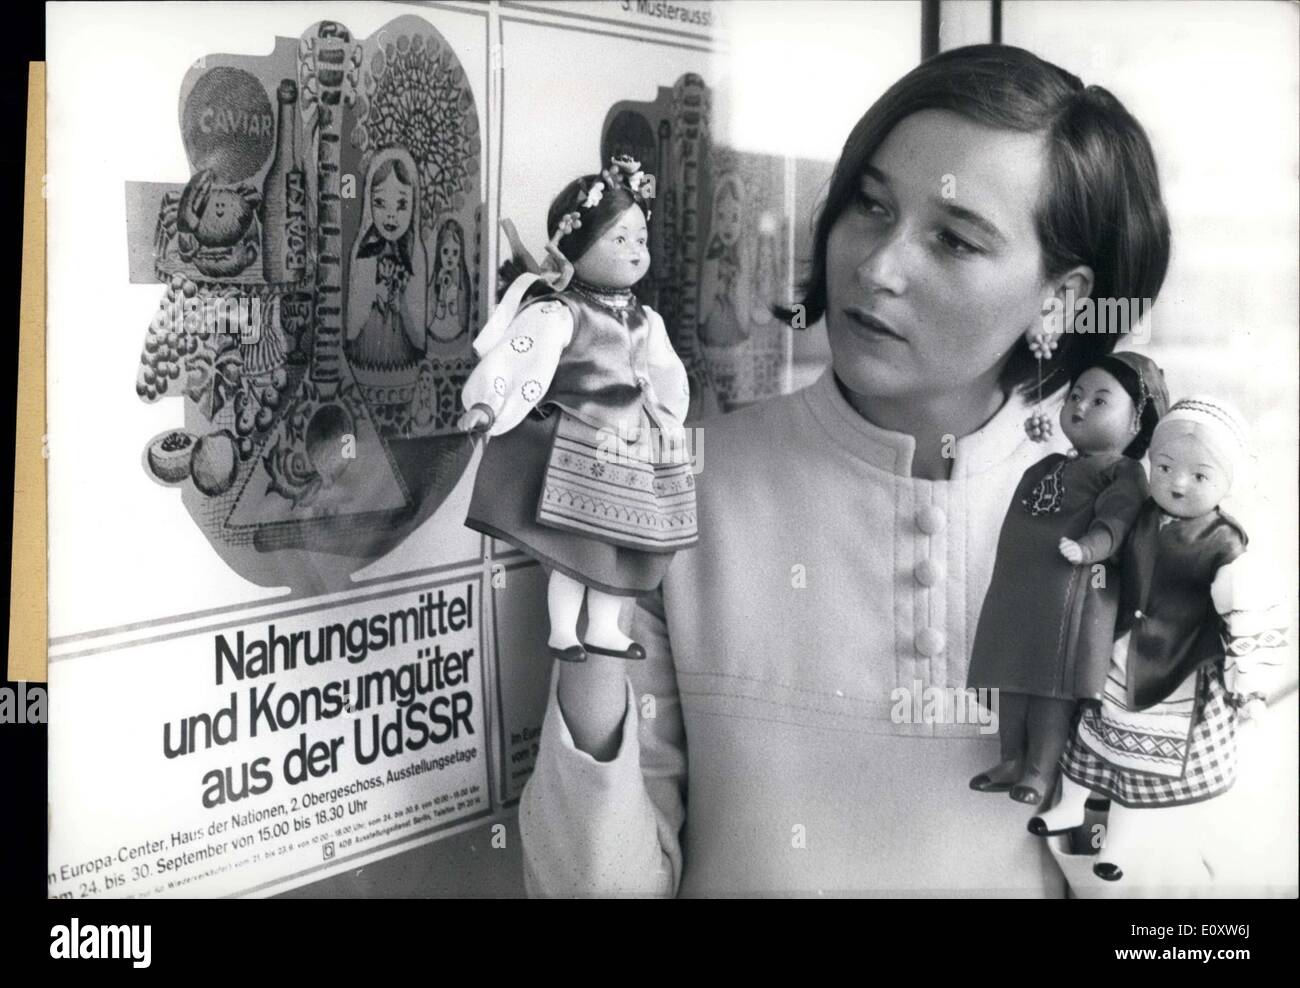 Sep. 23, 1967 - Food and consumer goods from the Soviet Union can currently be seen in the Berlin Europe-Center. The visitors aren't showing interest just in the world-famous caviar, sparkling wine(Krim-Sekt), and vodka, but also in the other articles, like, for example, these puppets in the volksy costumes of the varying Soviet republics. The Berlin exhibition, which is occurring for the third time and is highly successful, is to bridge the gap between East and West. Stock Photo